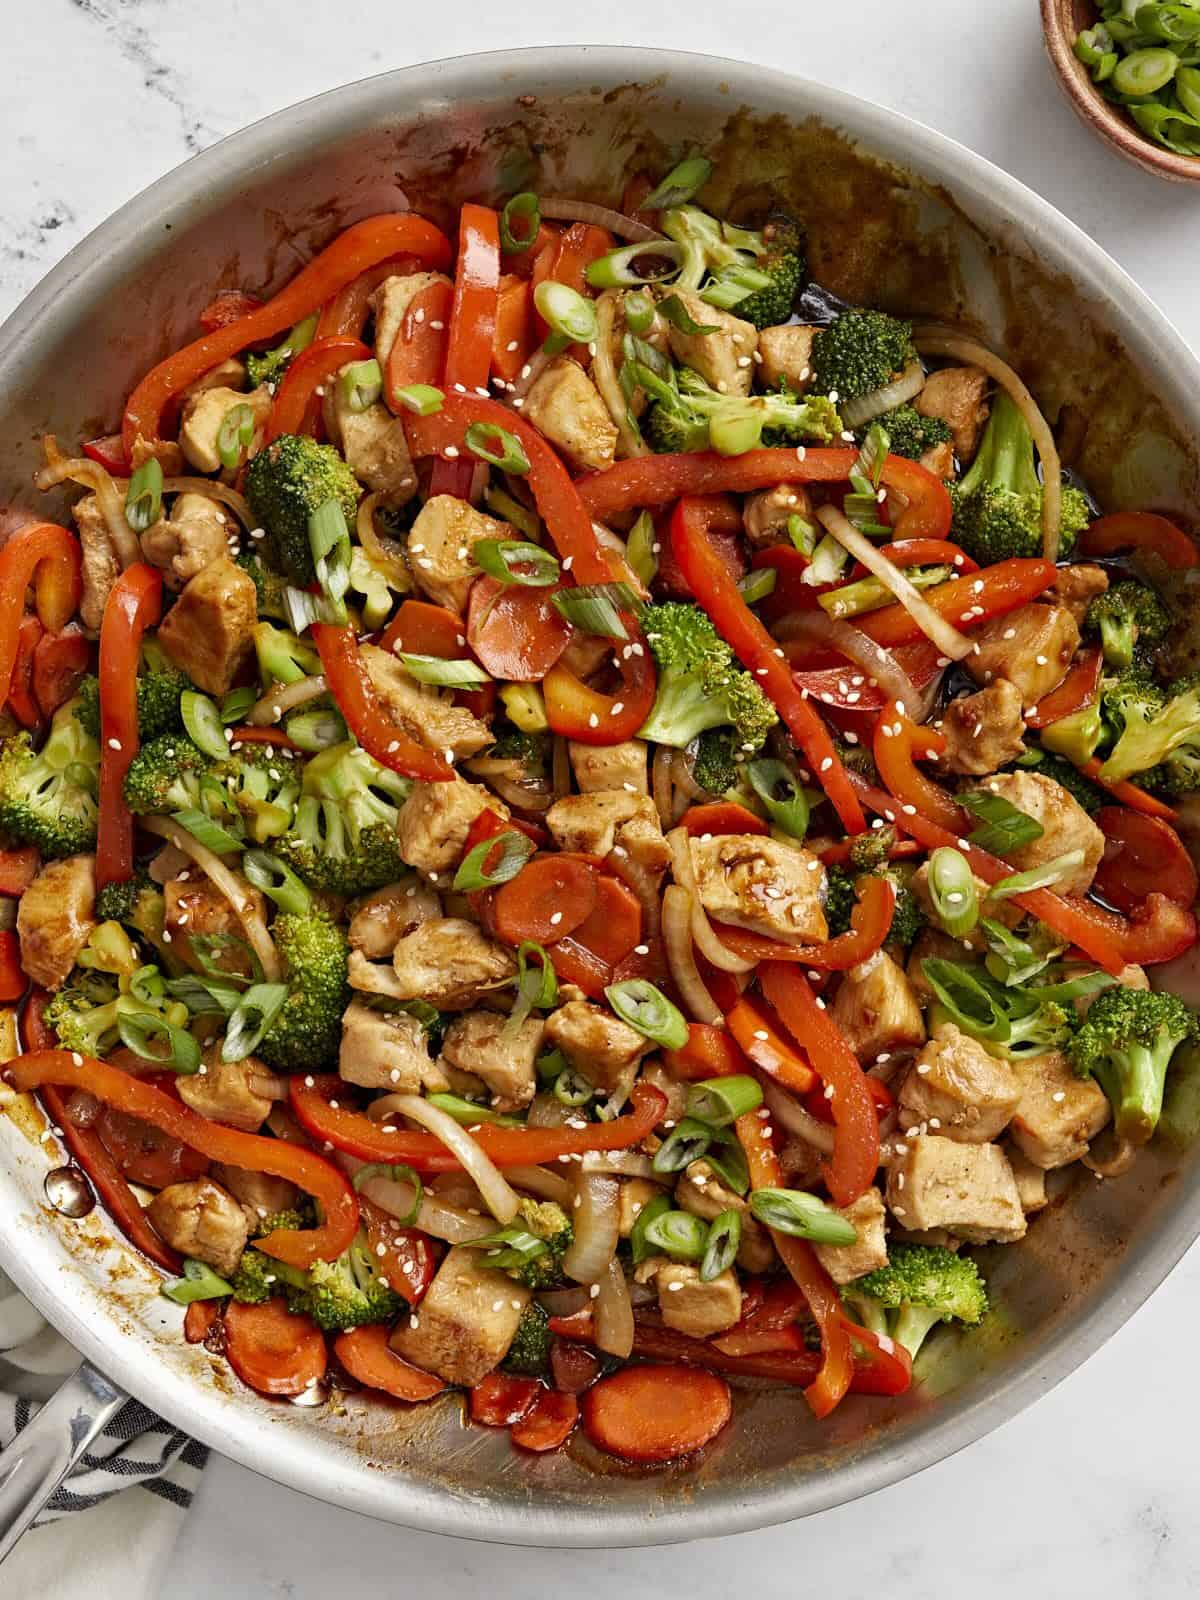 Overhead view of chicken stir fry in a large skillet with sliced green onions on the side.